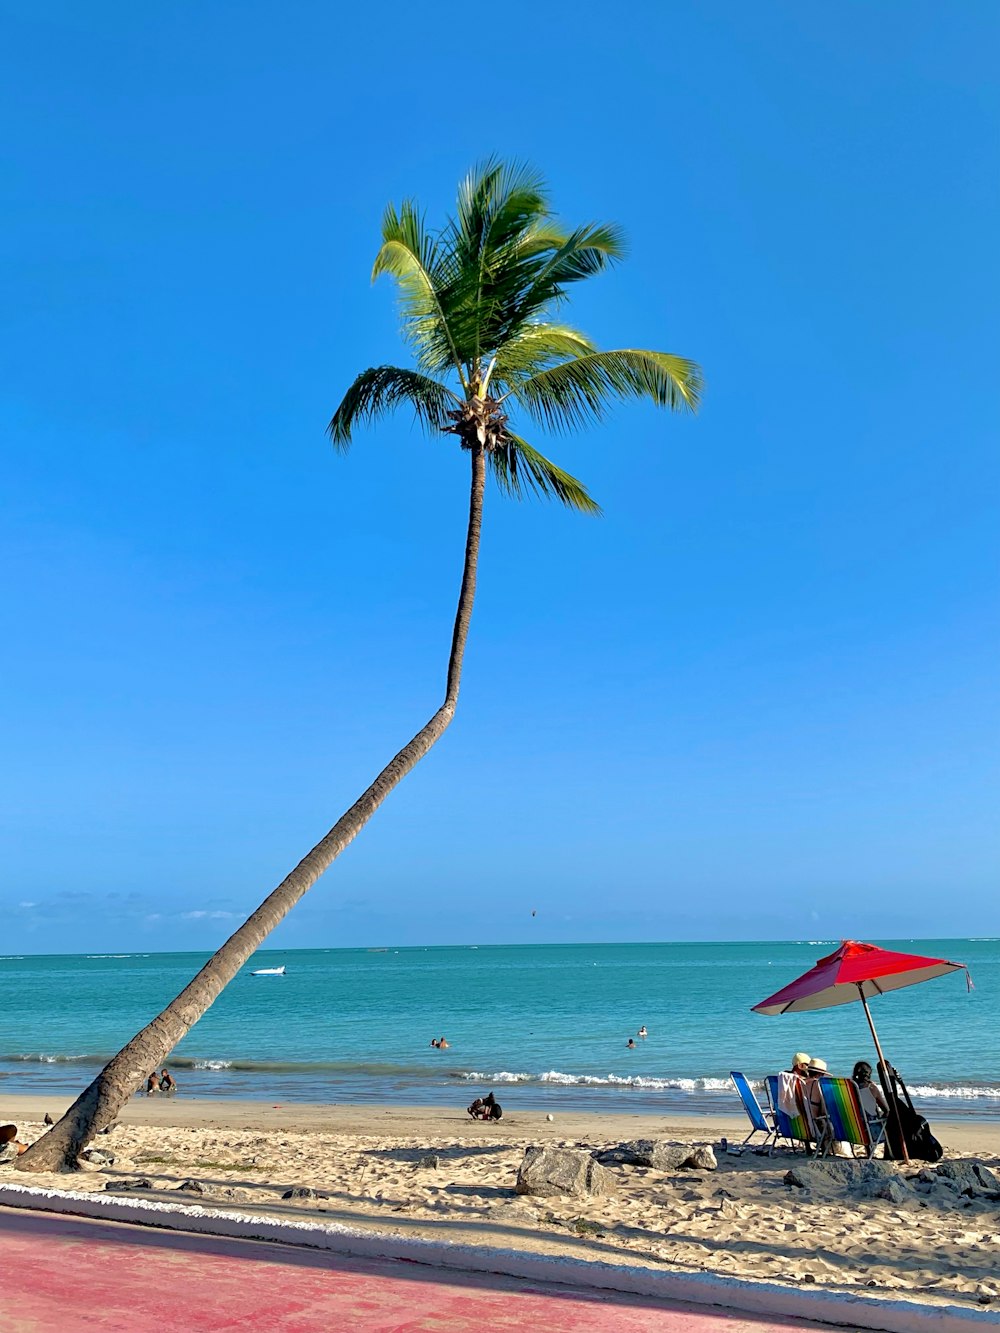 a palm tree on a beach with a red umbrella